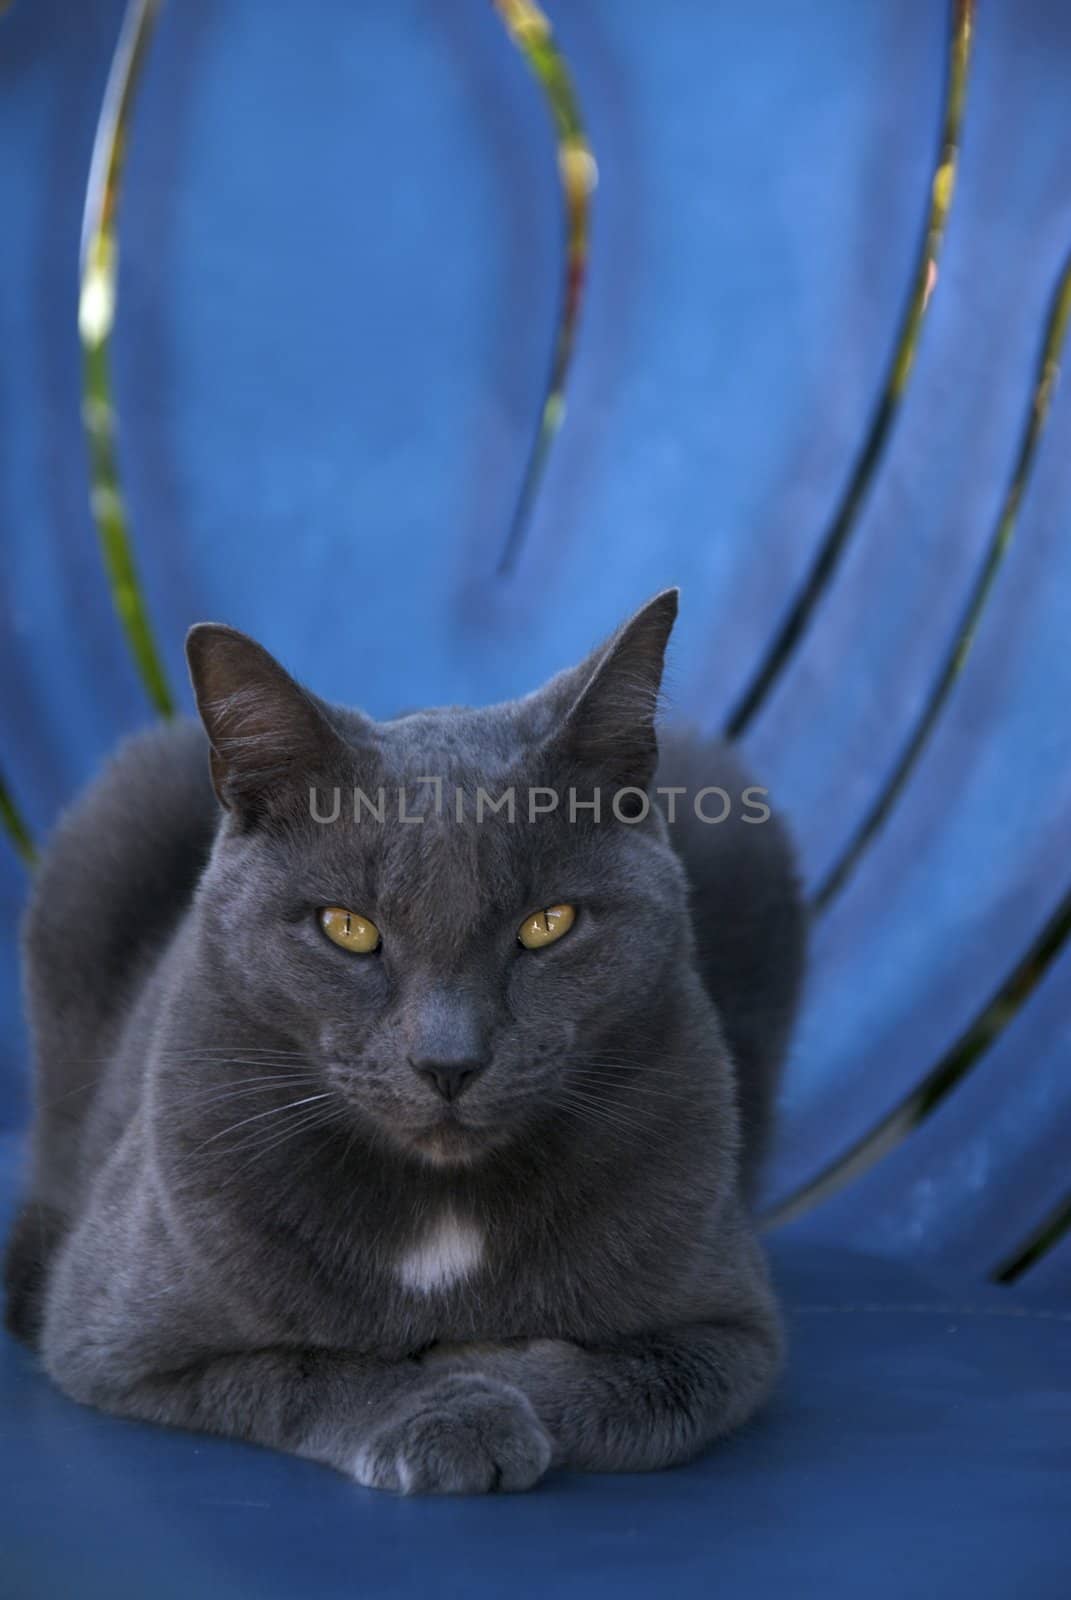 Black Cat on Blue Chair by npologuy